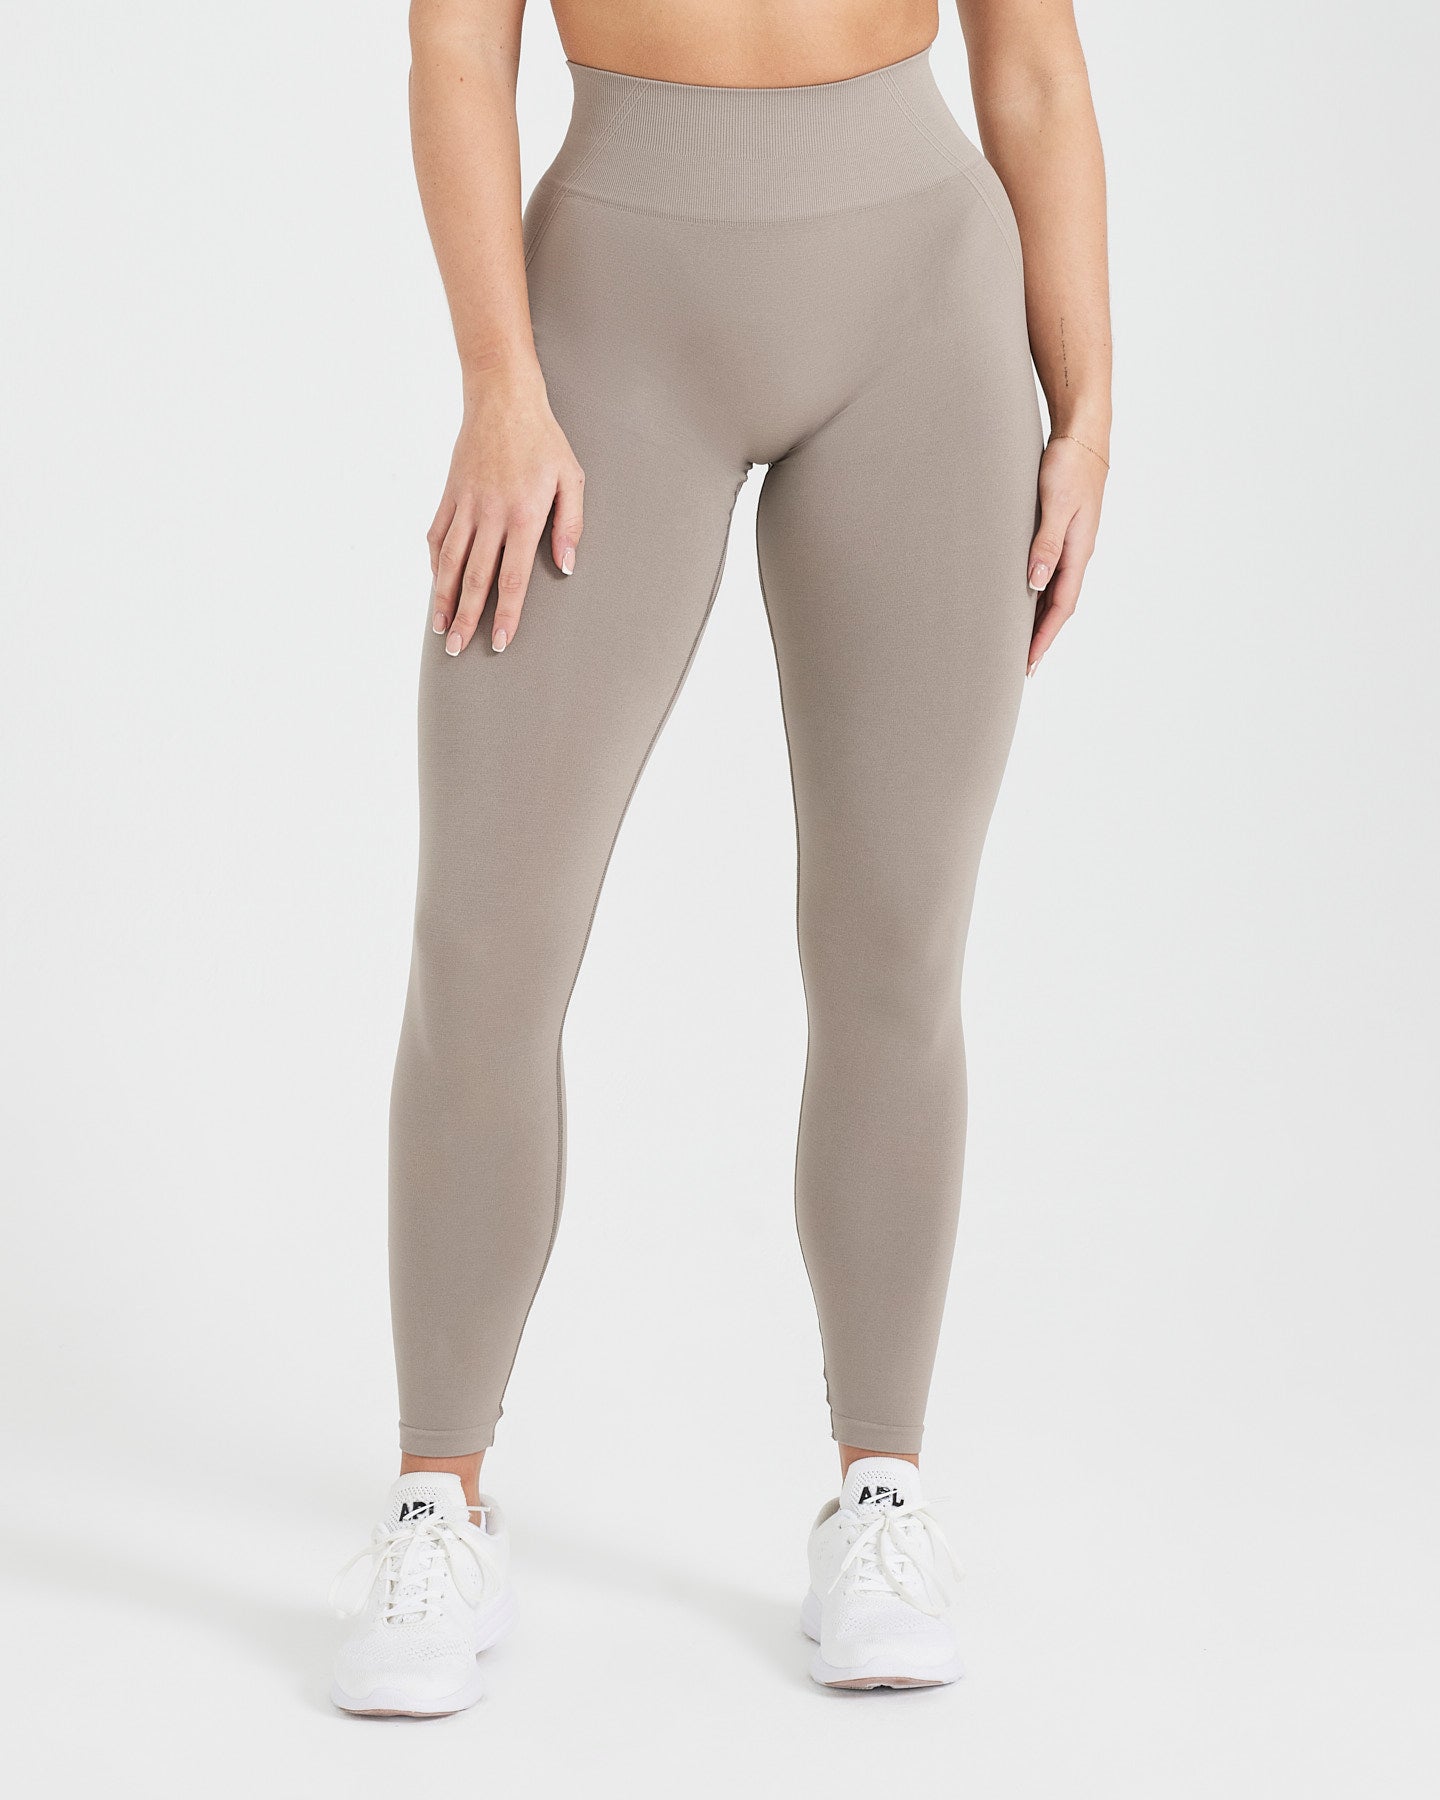 Women's Leggings With Elastic Waist # F201L – Professional Fit Clothing